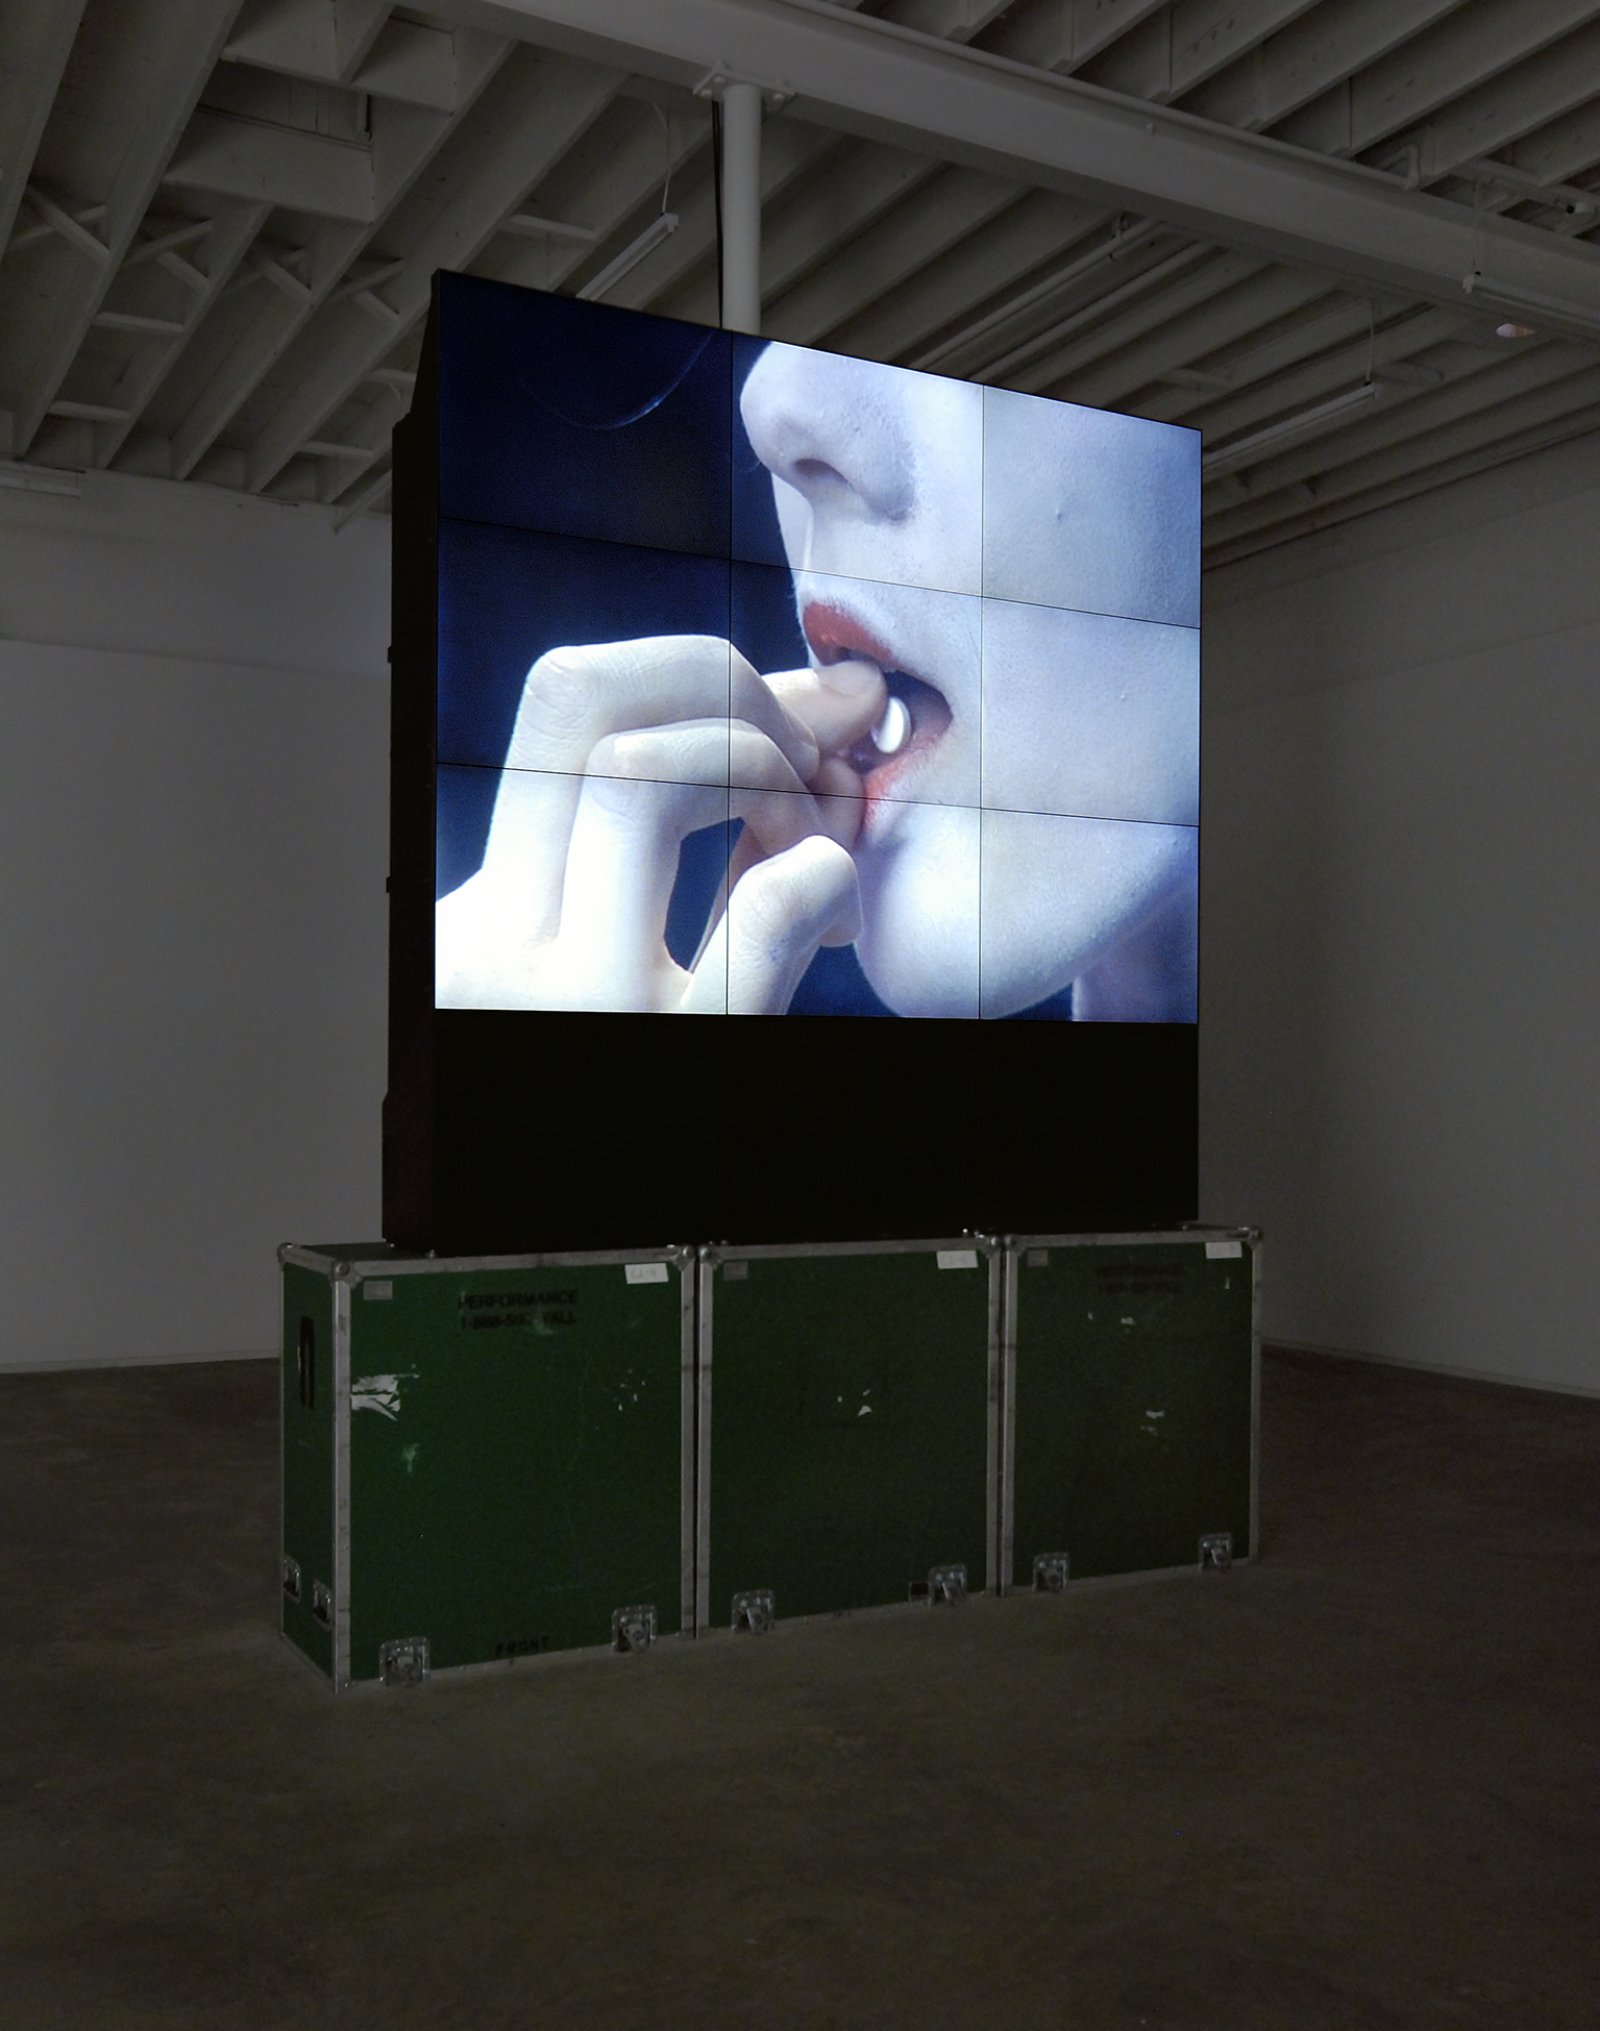 Ron Terada, Voight Kampff, 2008, single channel blu-ray DVD: 2 minutes, edition of 4, dimensions variable by Ron Terada